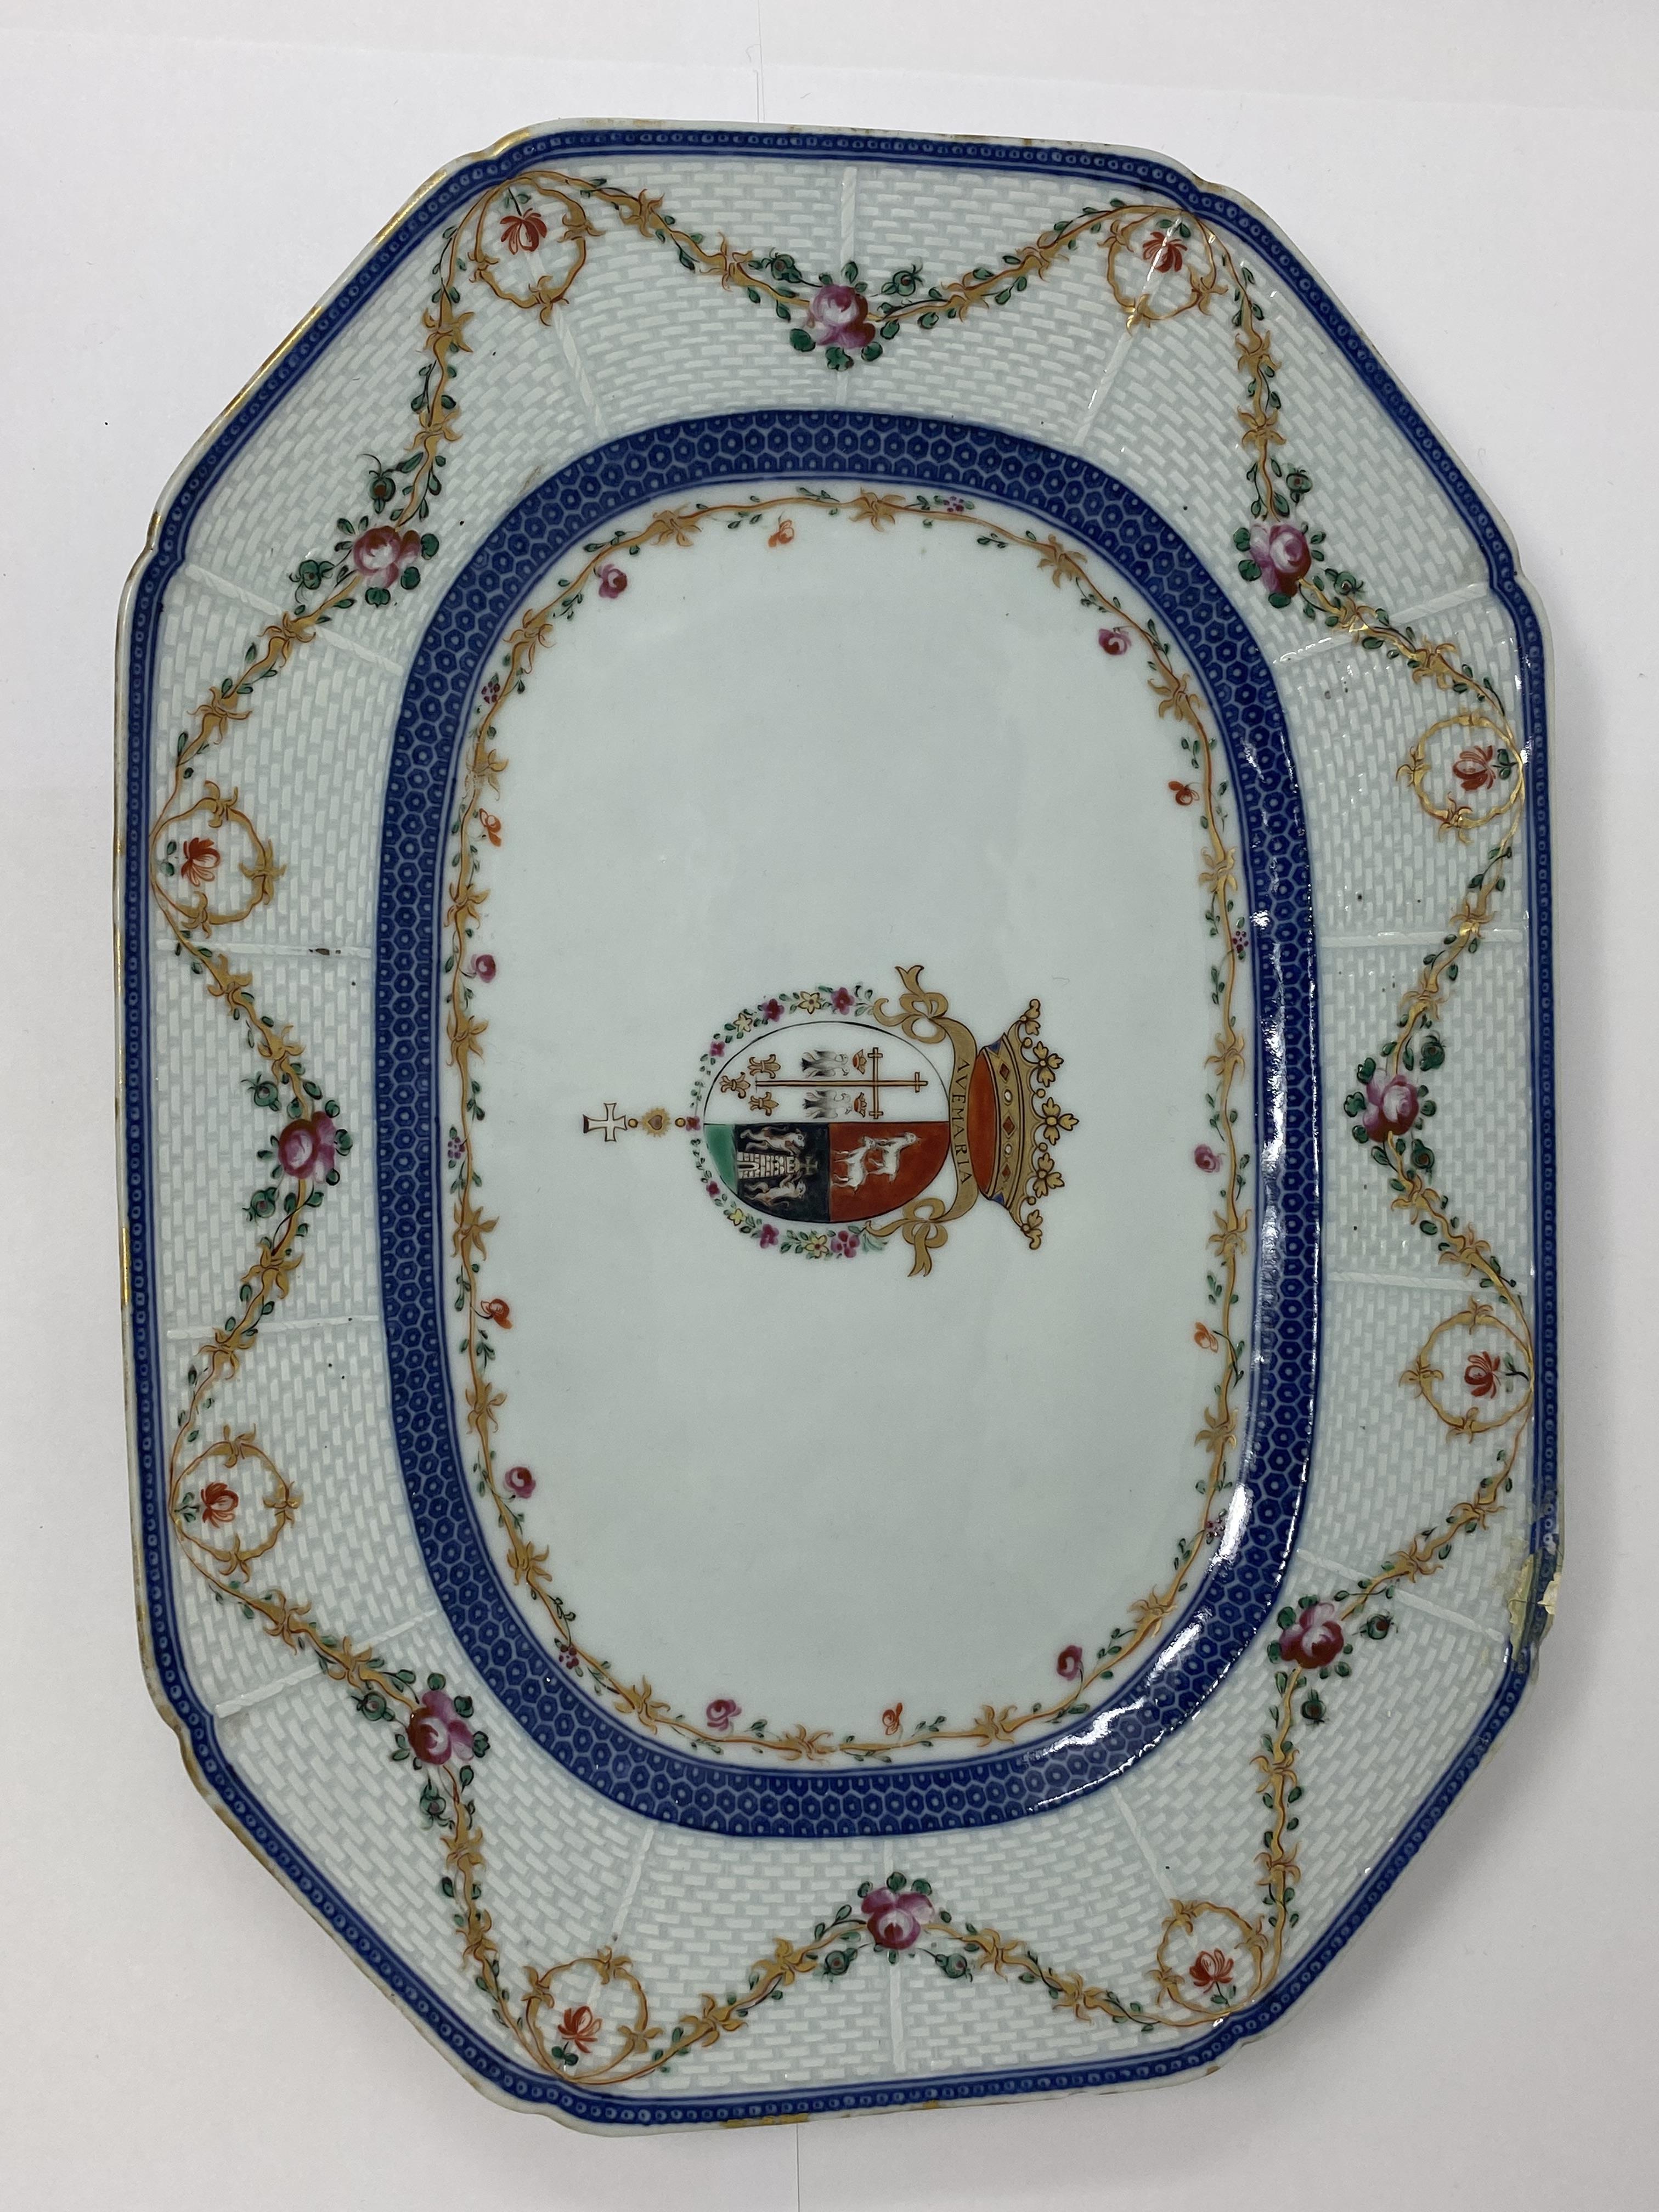 FOUR CHINESE EXPORT FAMILLE-ROSE ARMORIAL PORCELAINS, 18TH CENTURY - Image 12 of 13